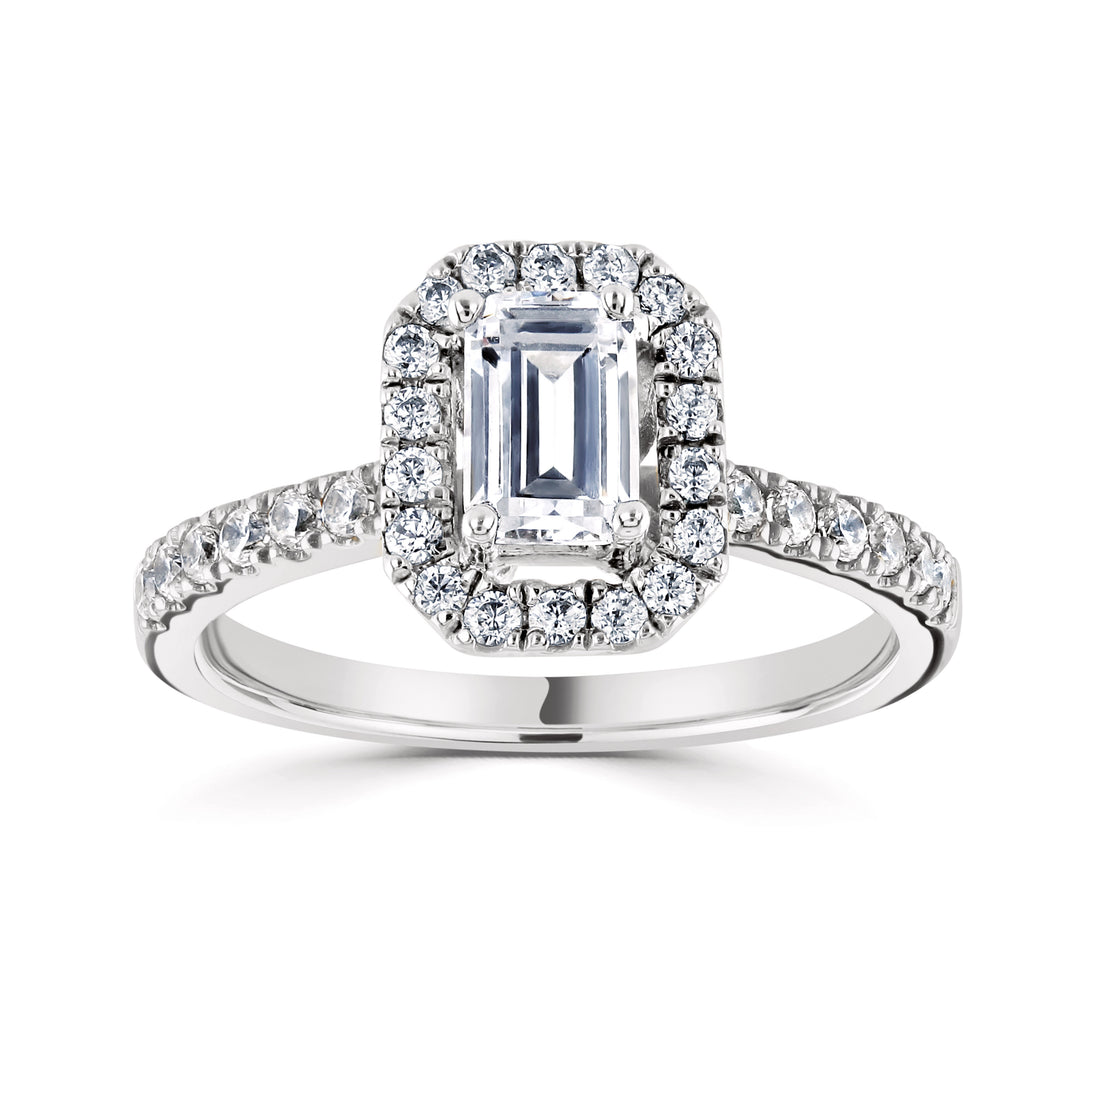 18CT White Gold Emerald Cut Diamond Halo Ring with Diamond Shoulders